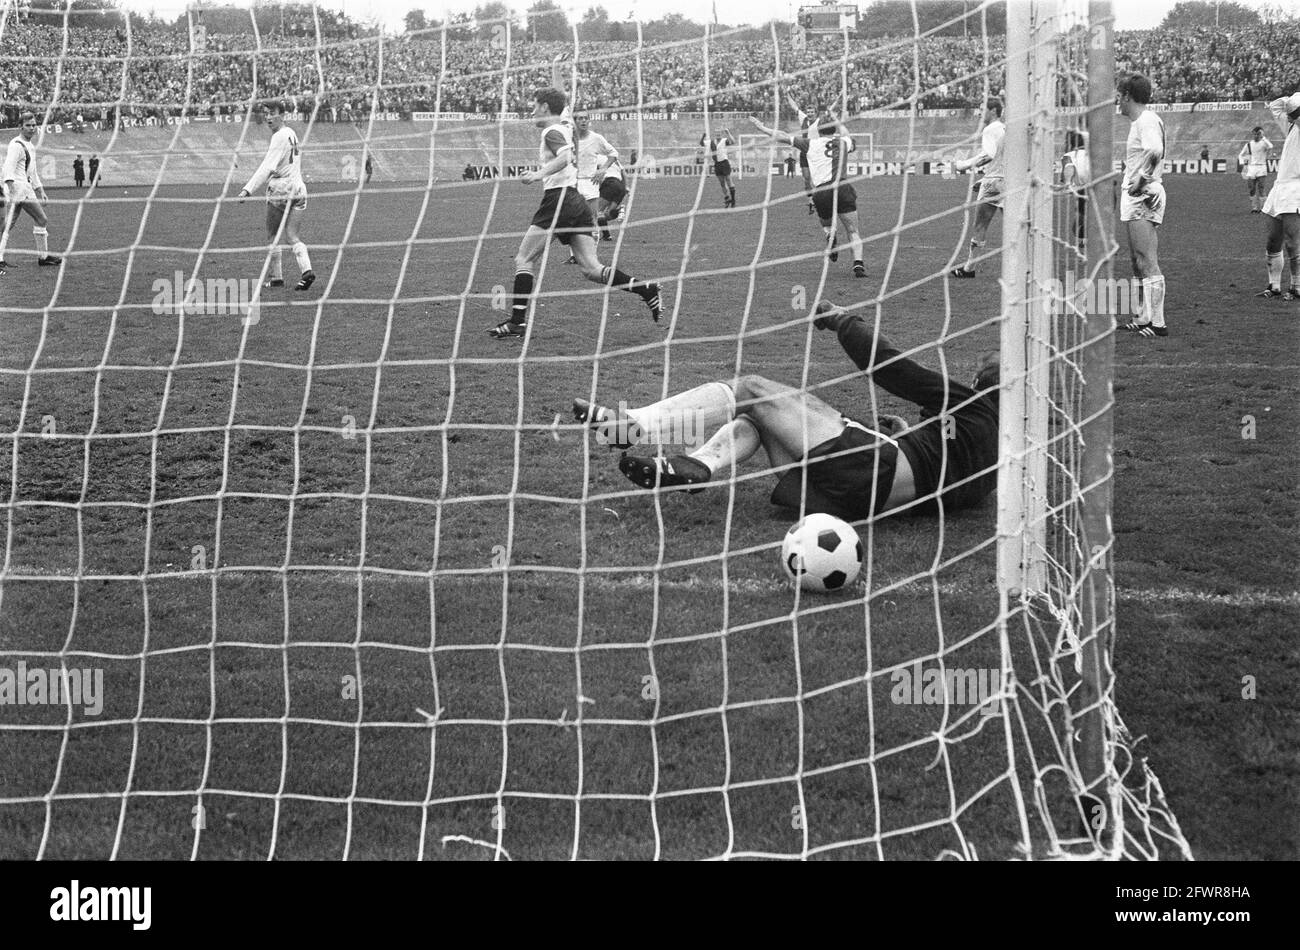 NEC v Feyenoord 0-2. Keeper de Bree allowed ball to pass, into net, 26 October 1969, sport, soccer, The Netherlands, 20th century press agency photo, news to remember, documentary, historic photography 1945-1990, visual stories, human history of the Twentieth Century, capturing moments in time Stock Photo